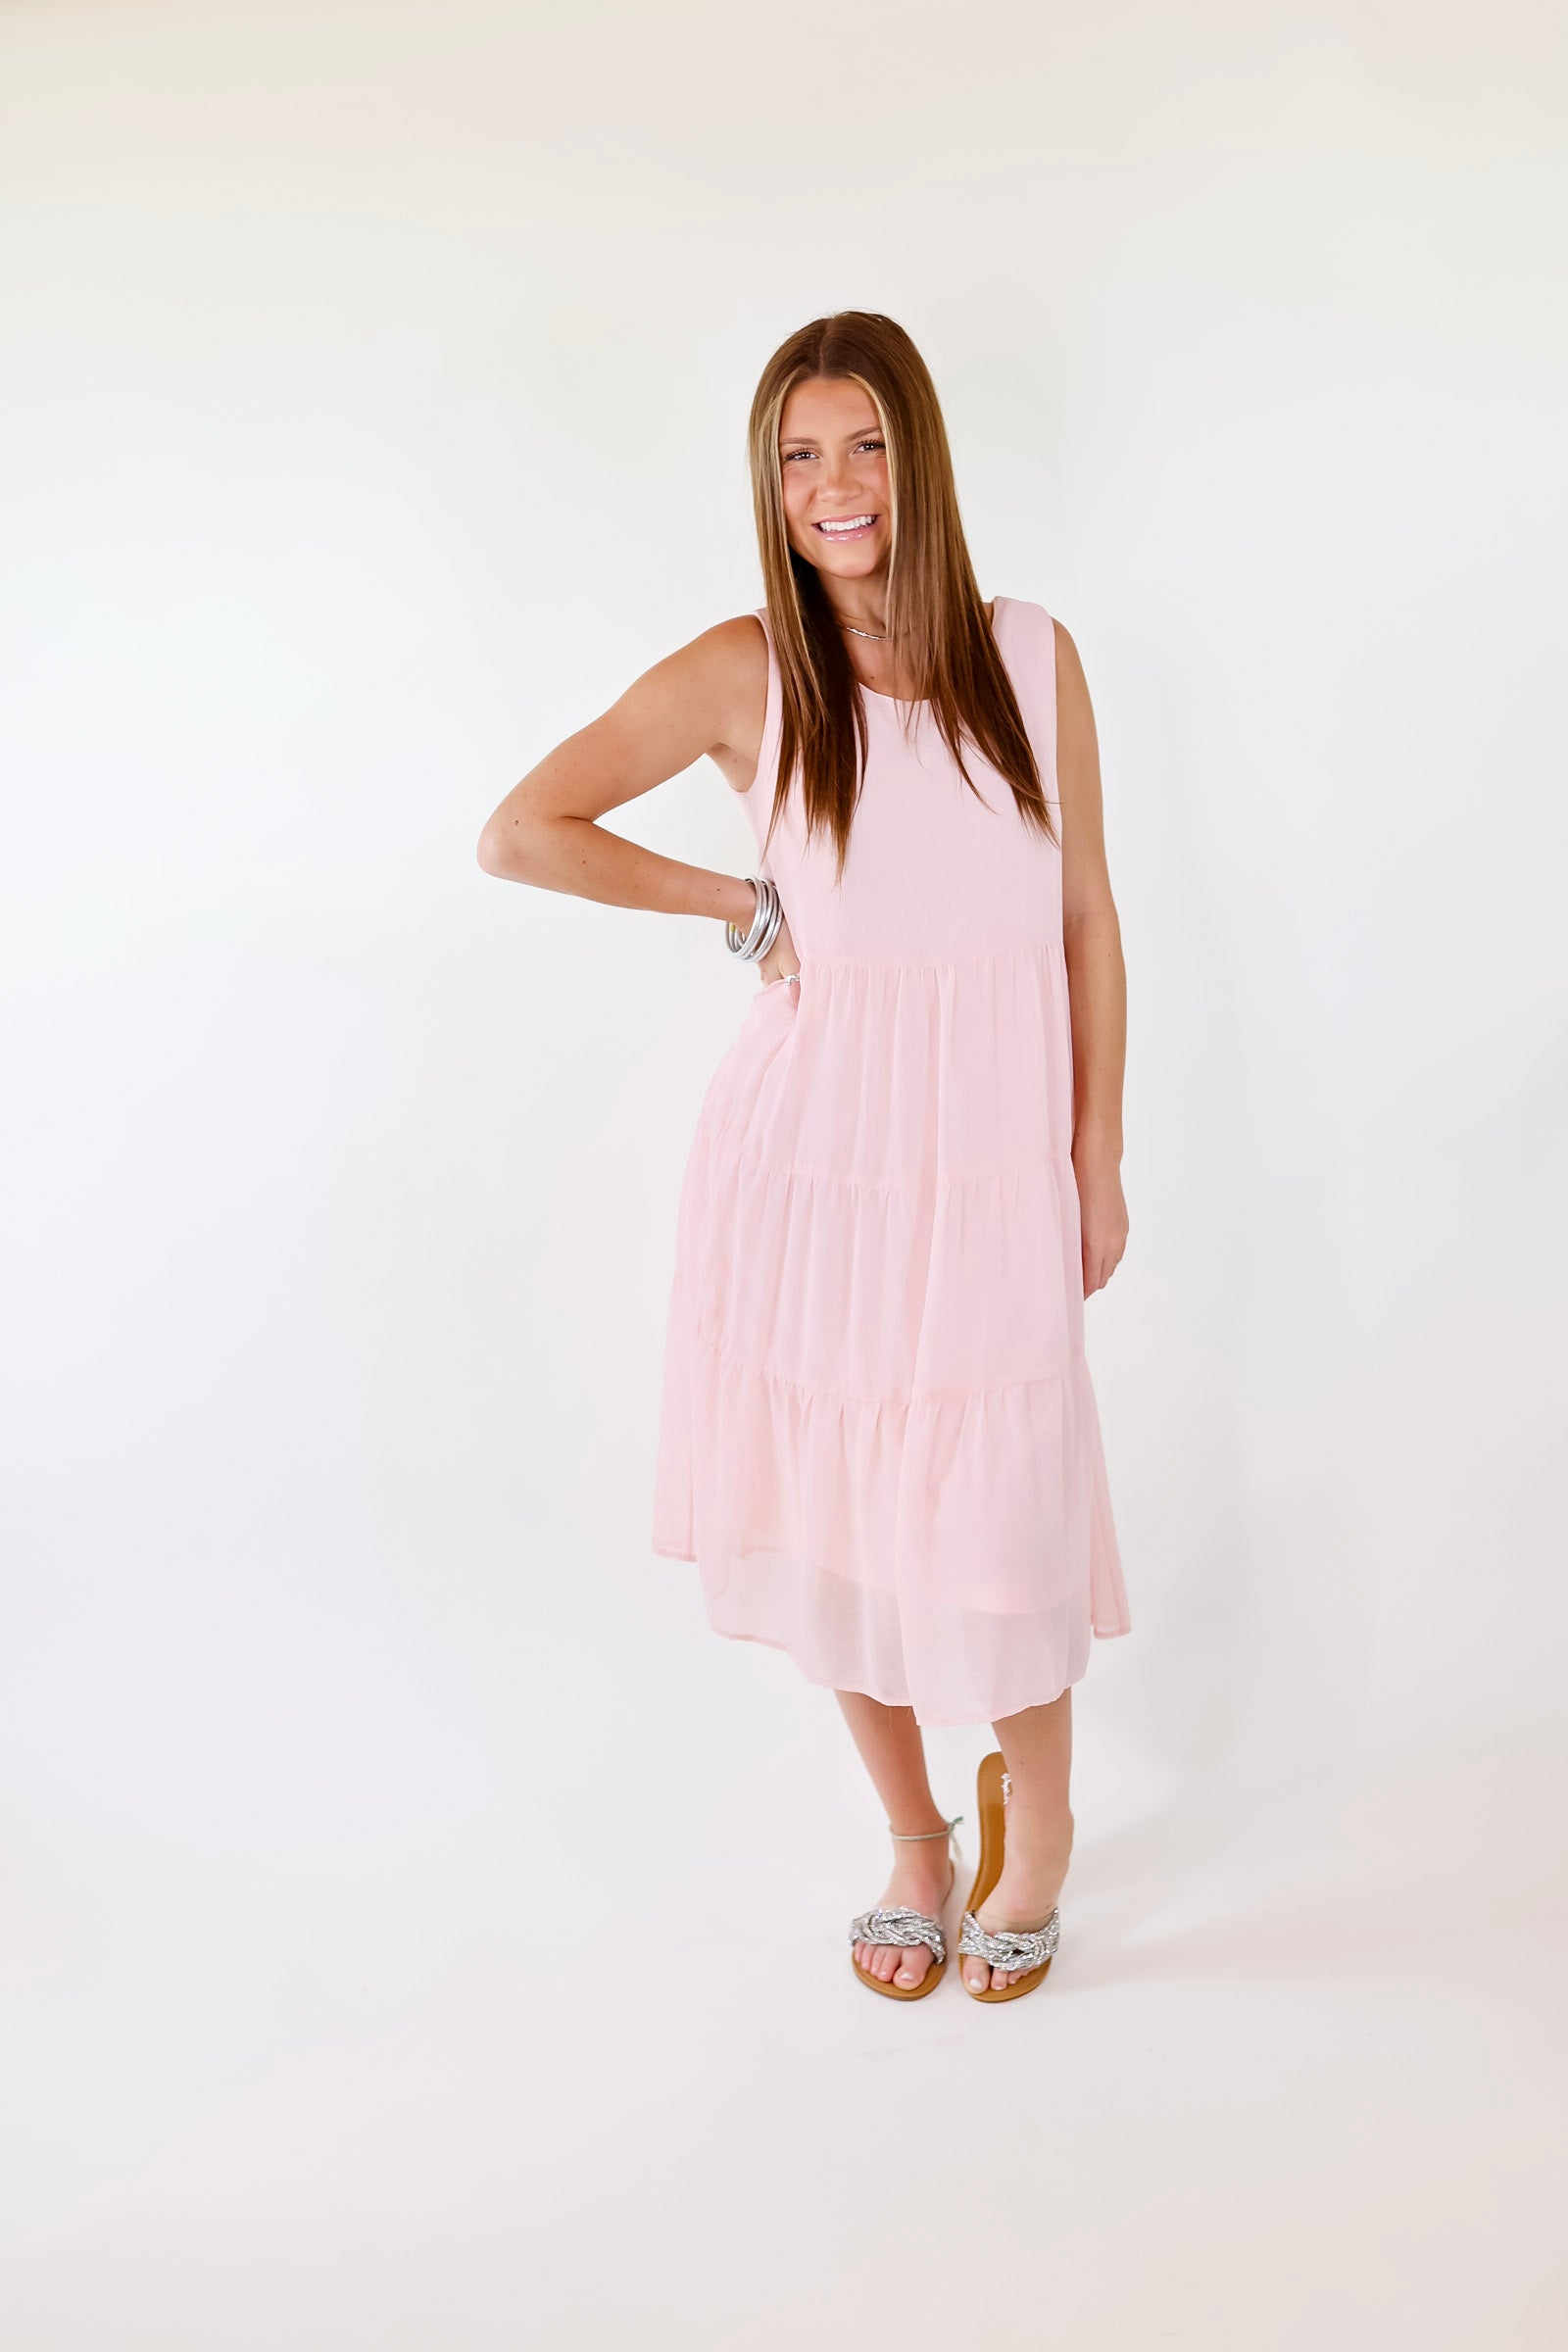 Mark My Words Tiered Tank Midi Dress in Blush Pink - Giddy Up Glamour Boutique